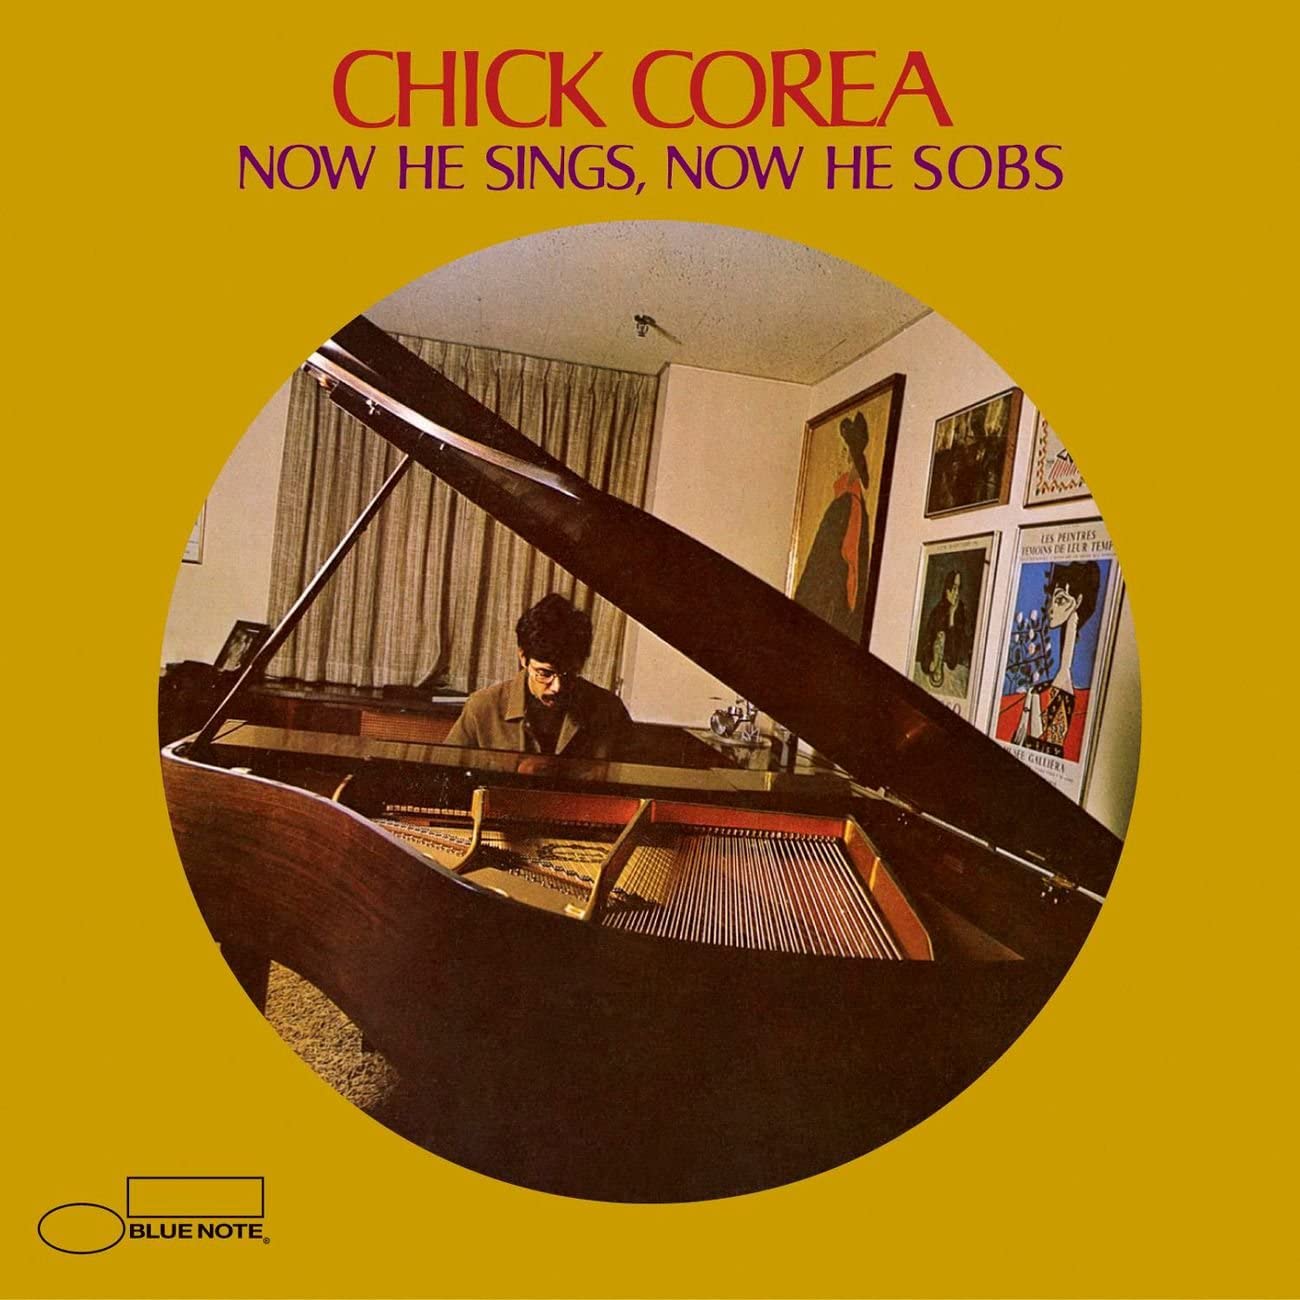 Chick Corea | 13 Essential Albums | Jazzwise